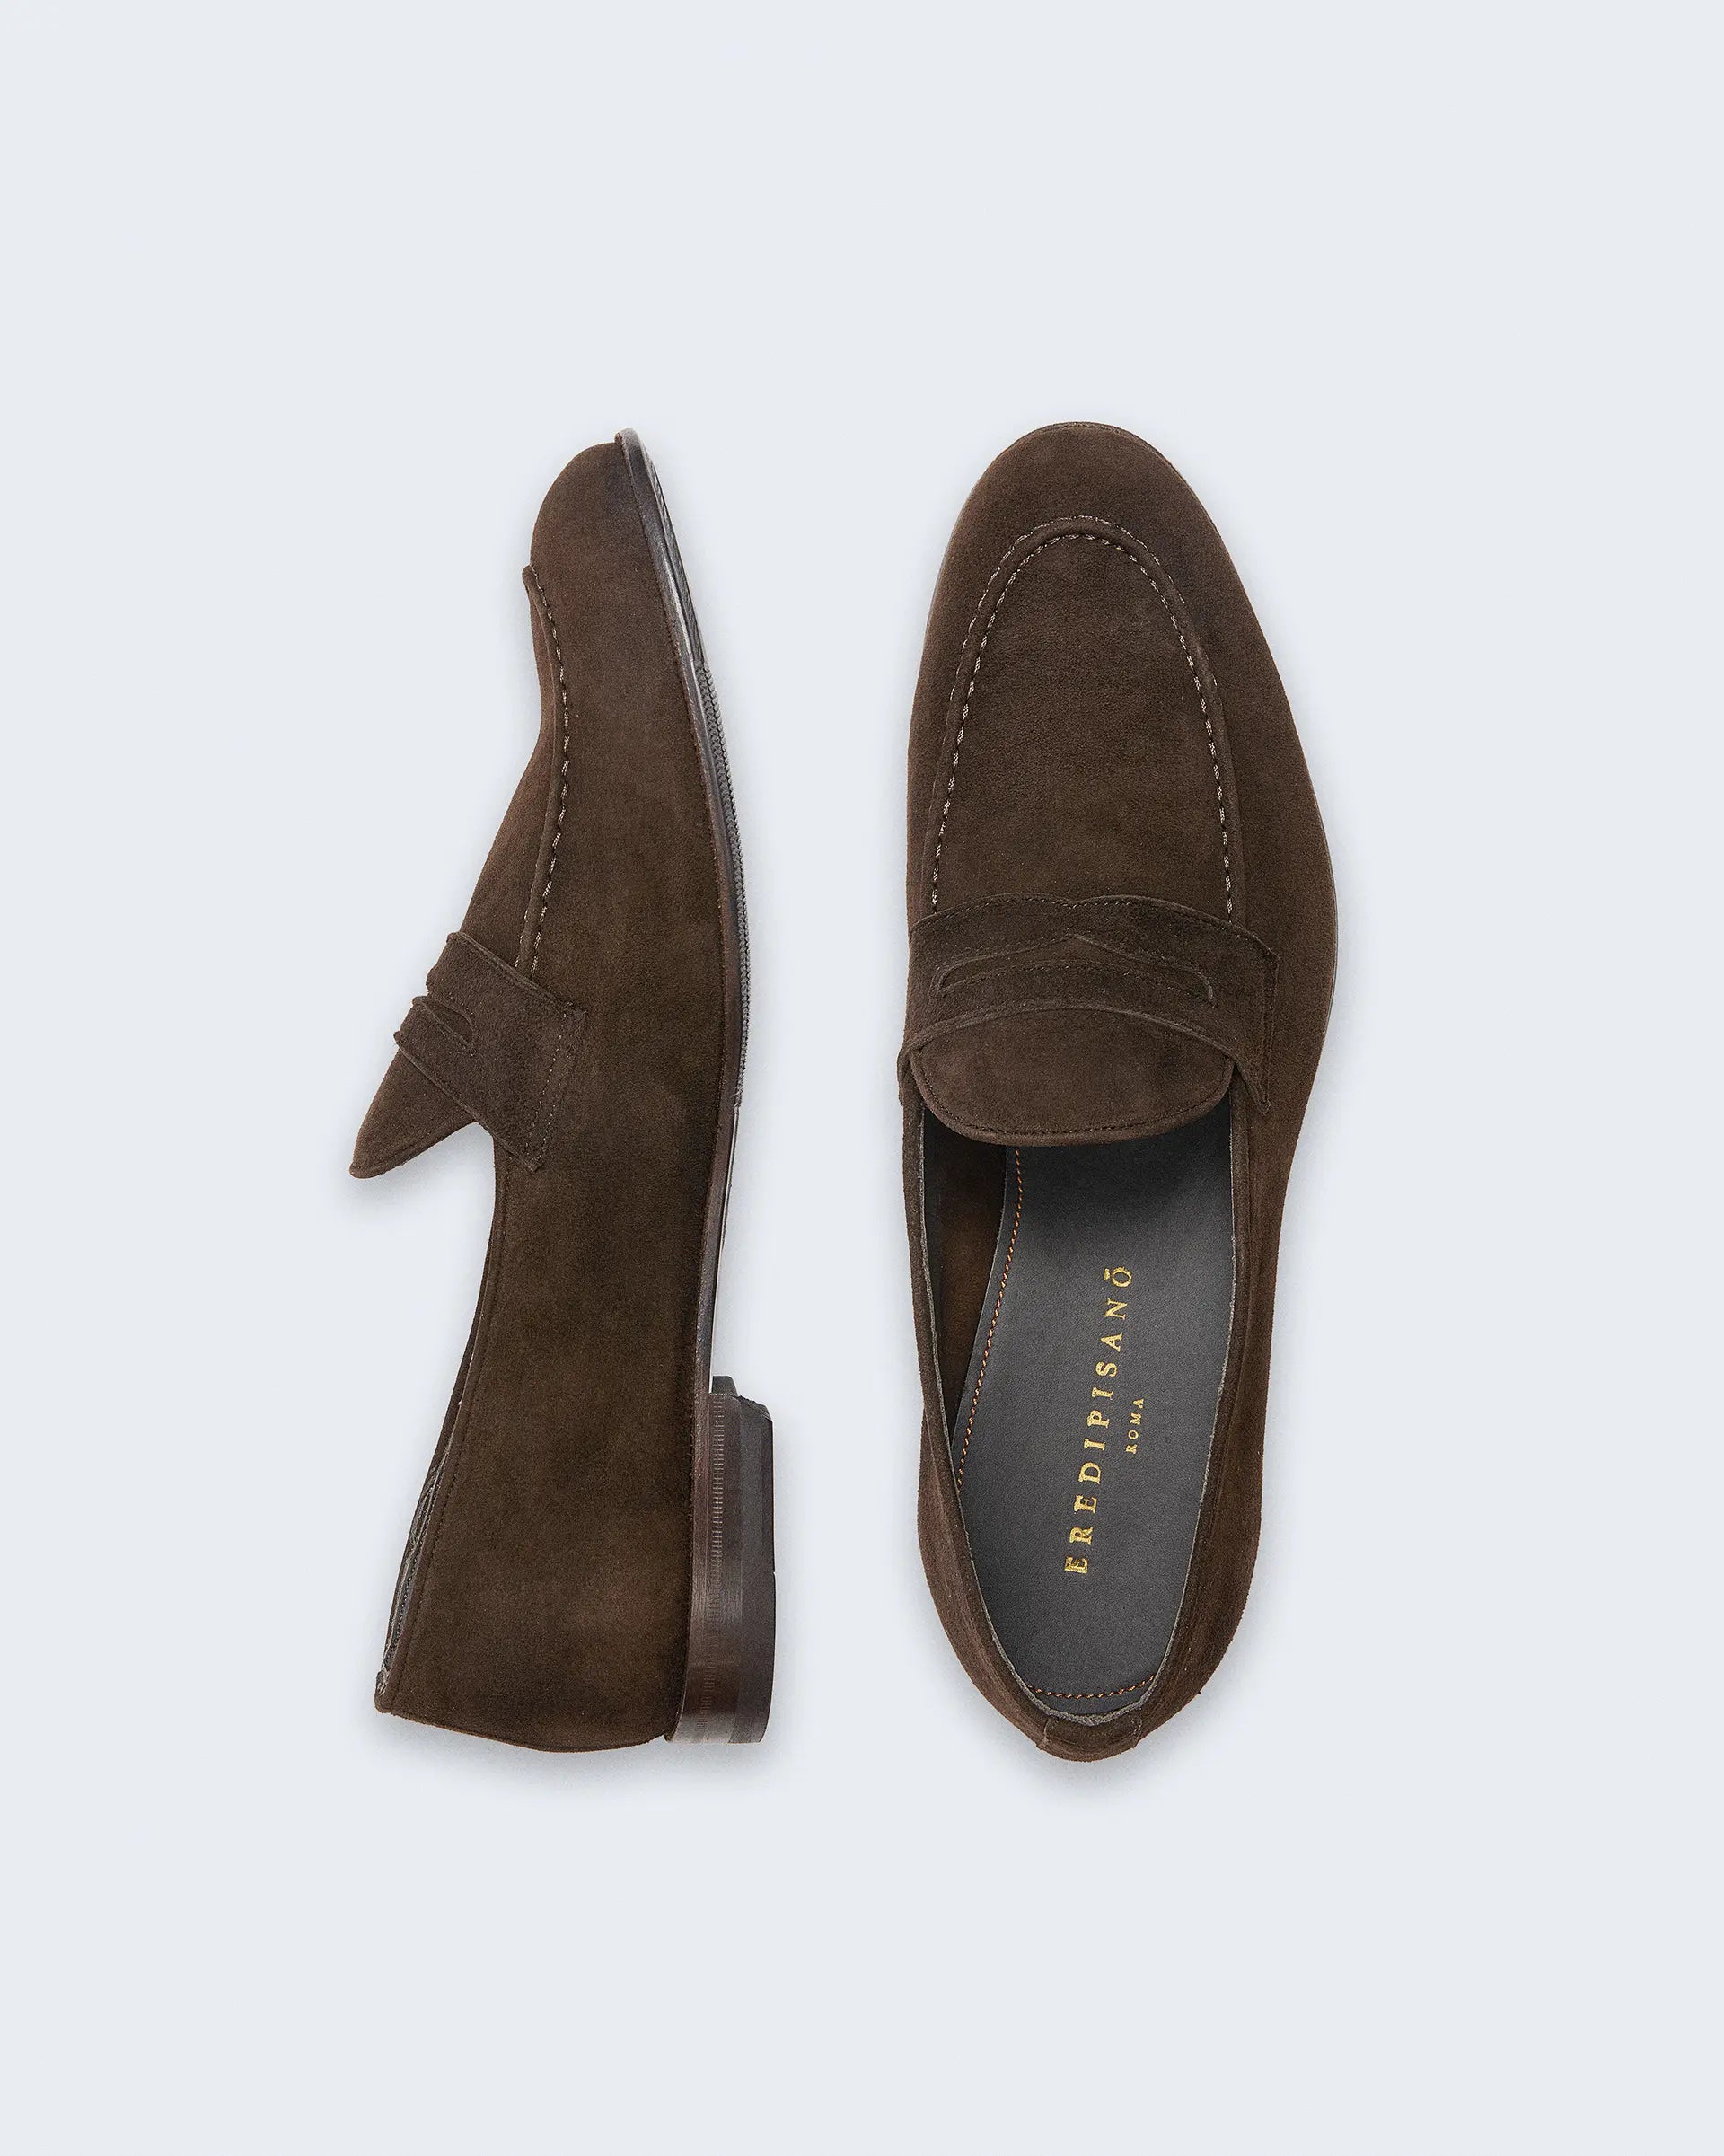 Brown Suede Moccassin